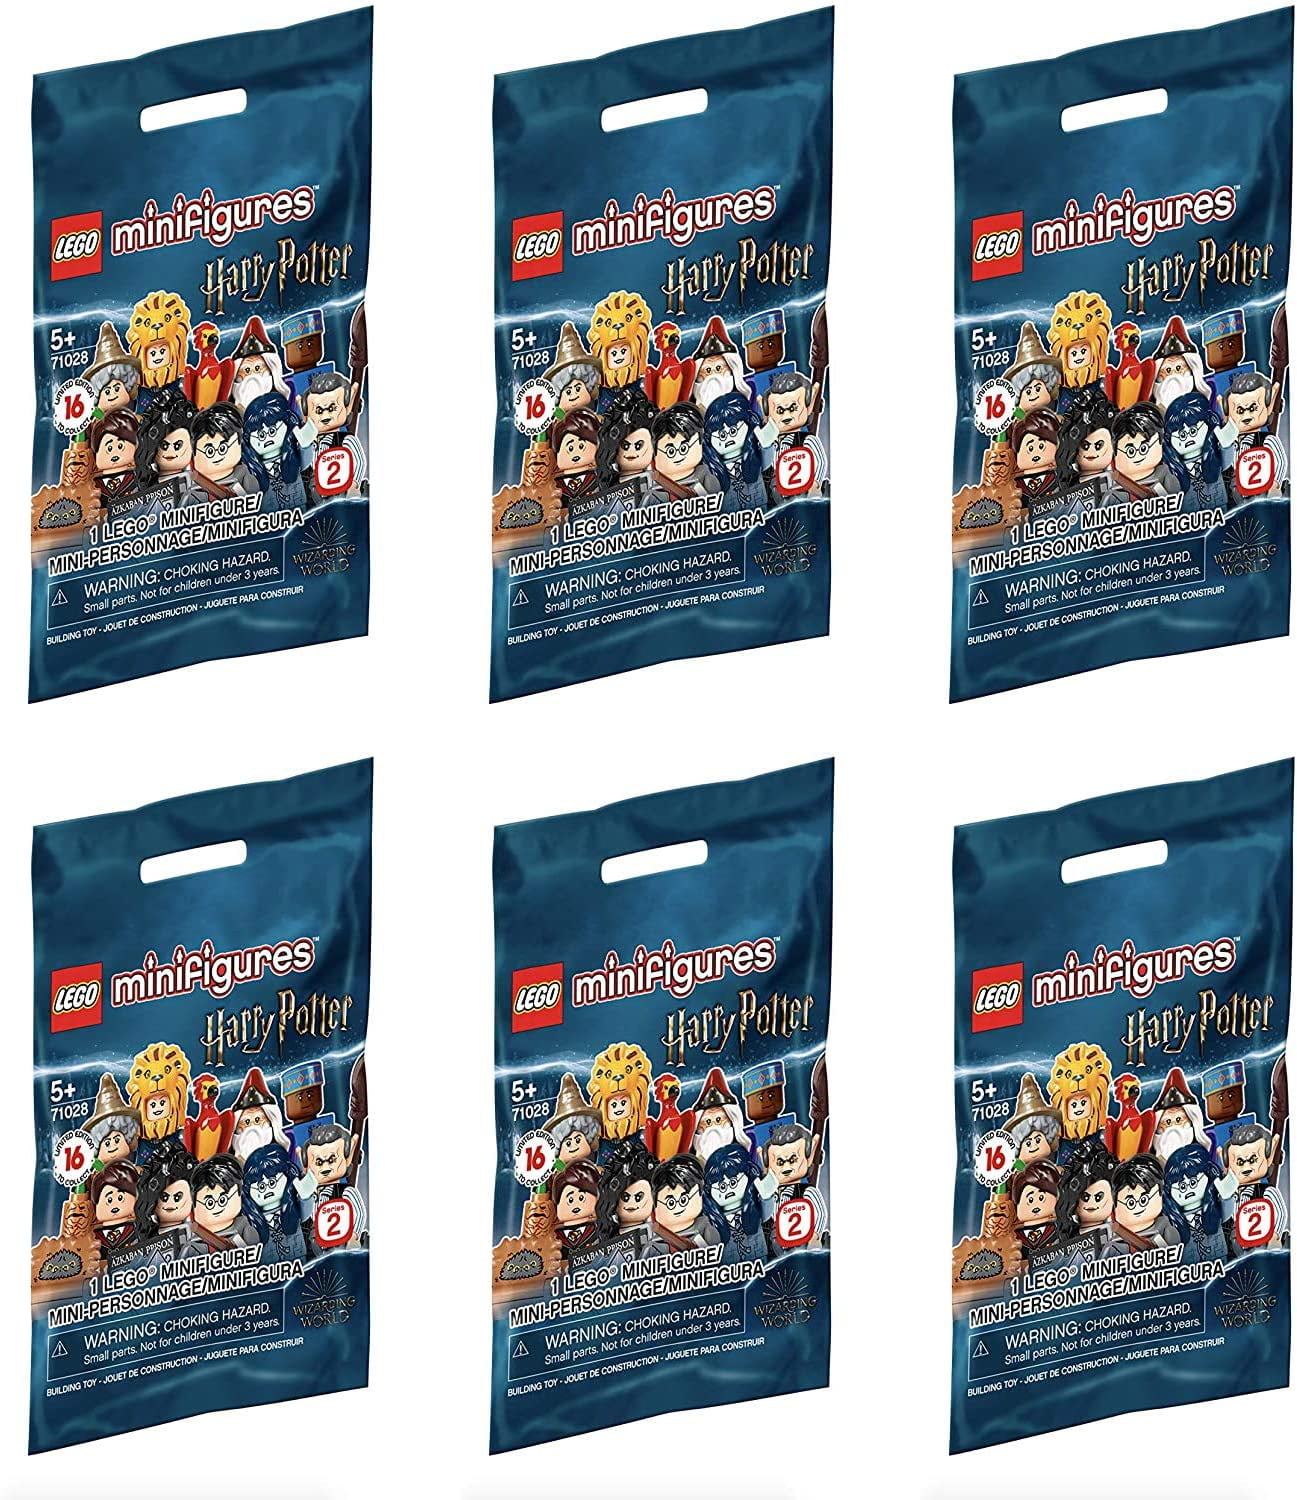 71028 Lot of 8 Blind Bags New Sealed Lego Harry Potter Minifigures Series 2 